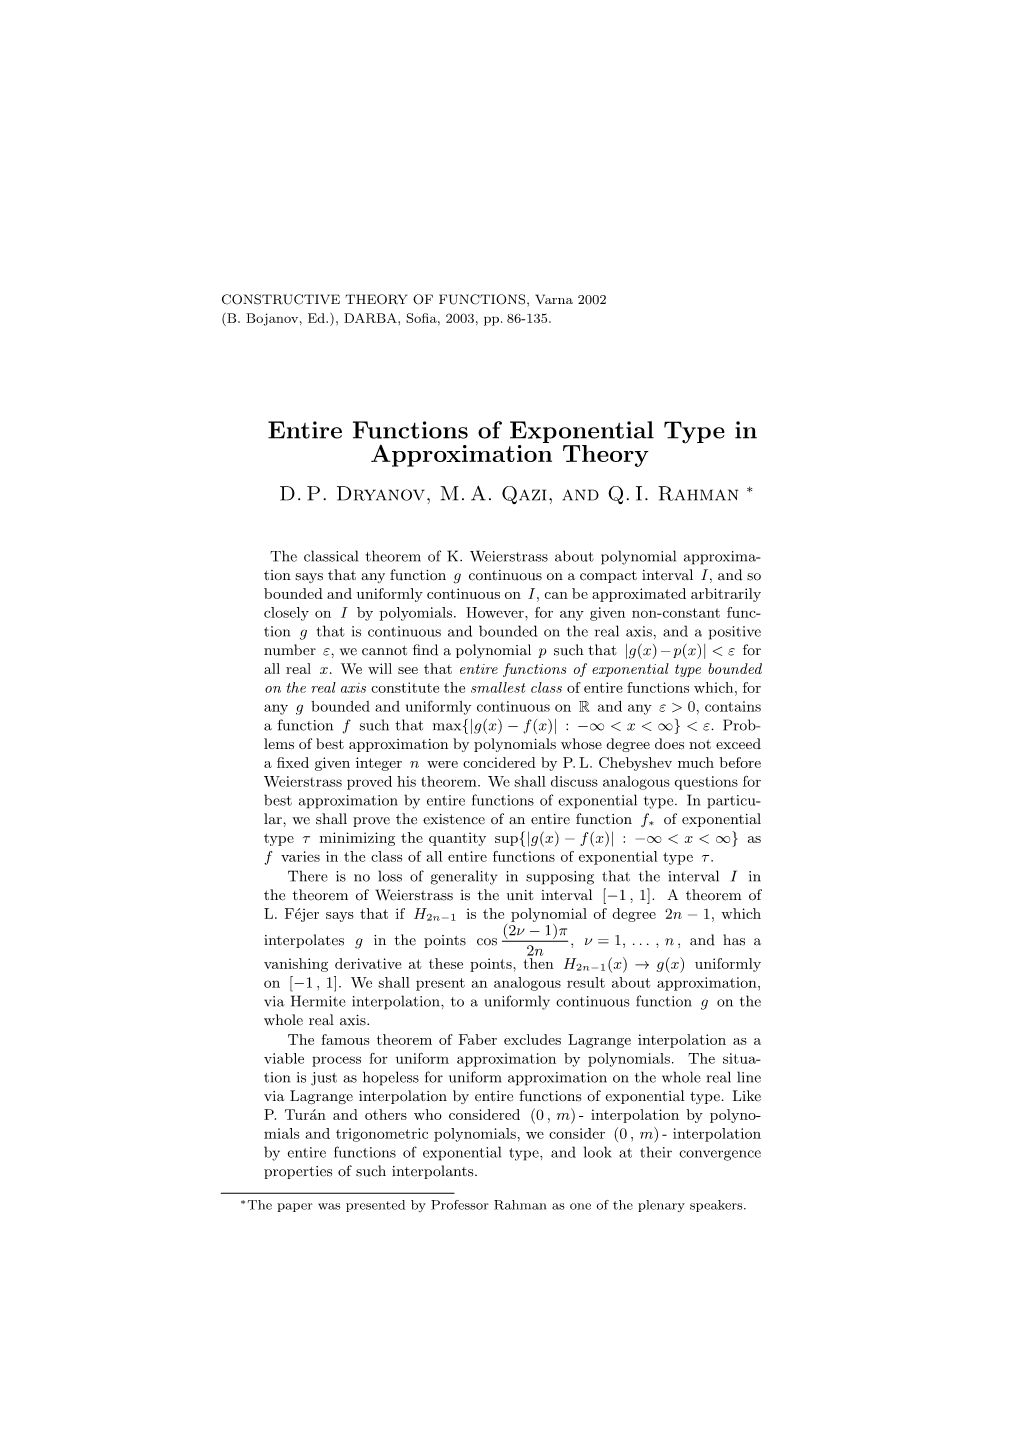 Entire Functions of Exponential Type in Approximation Theory D